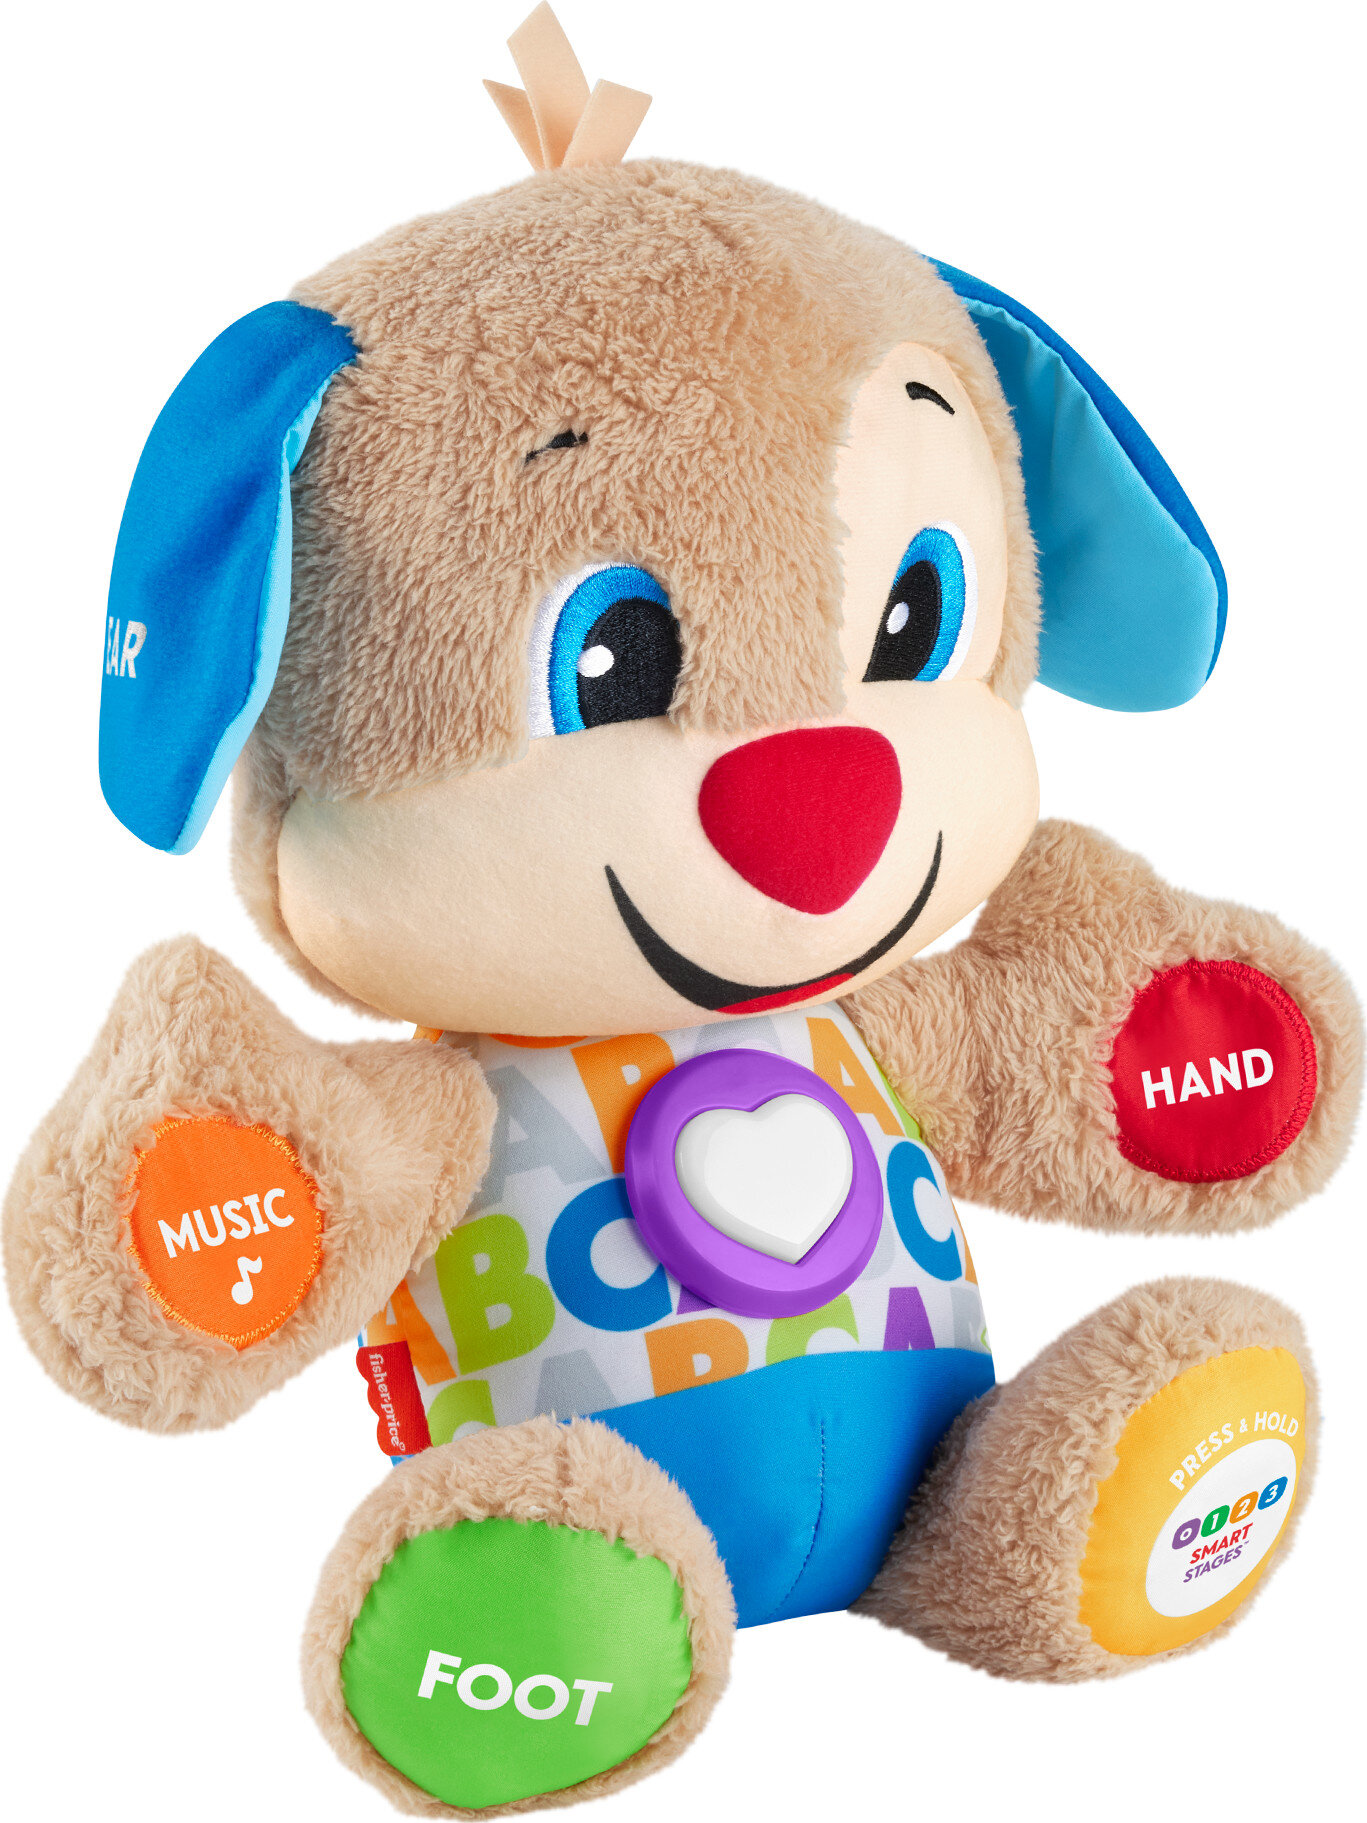 Fisher-Price Laugh & Learn Smart Stages Puppy Plush Learning Toy for Baby, Infants and Toddlers - image 1 of 8